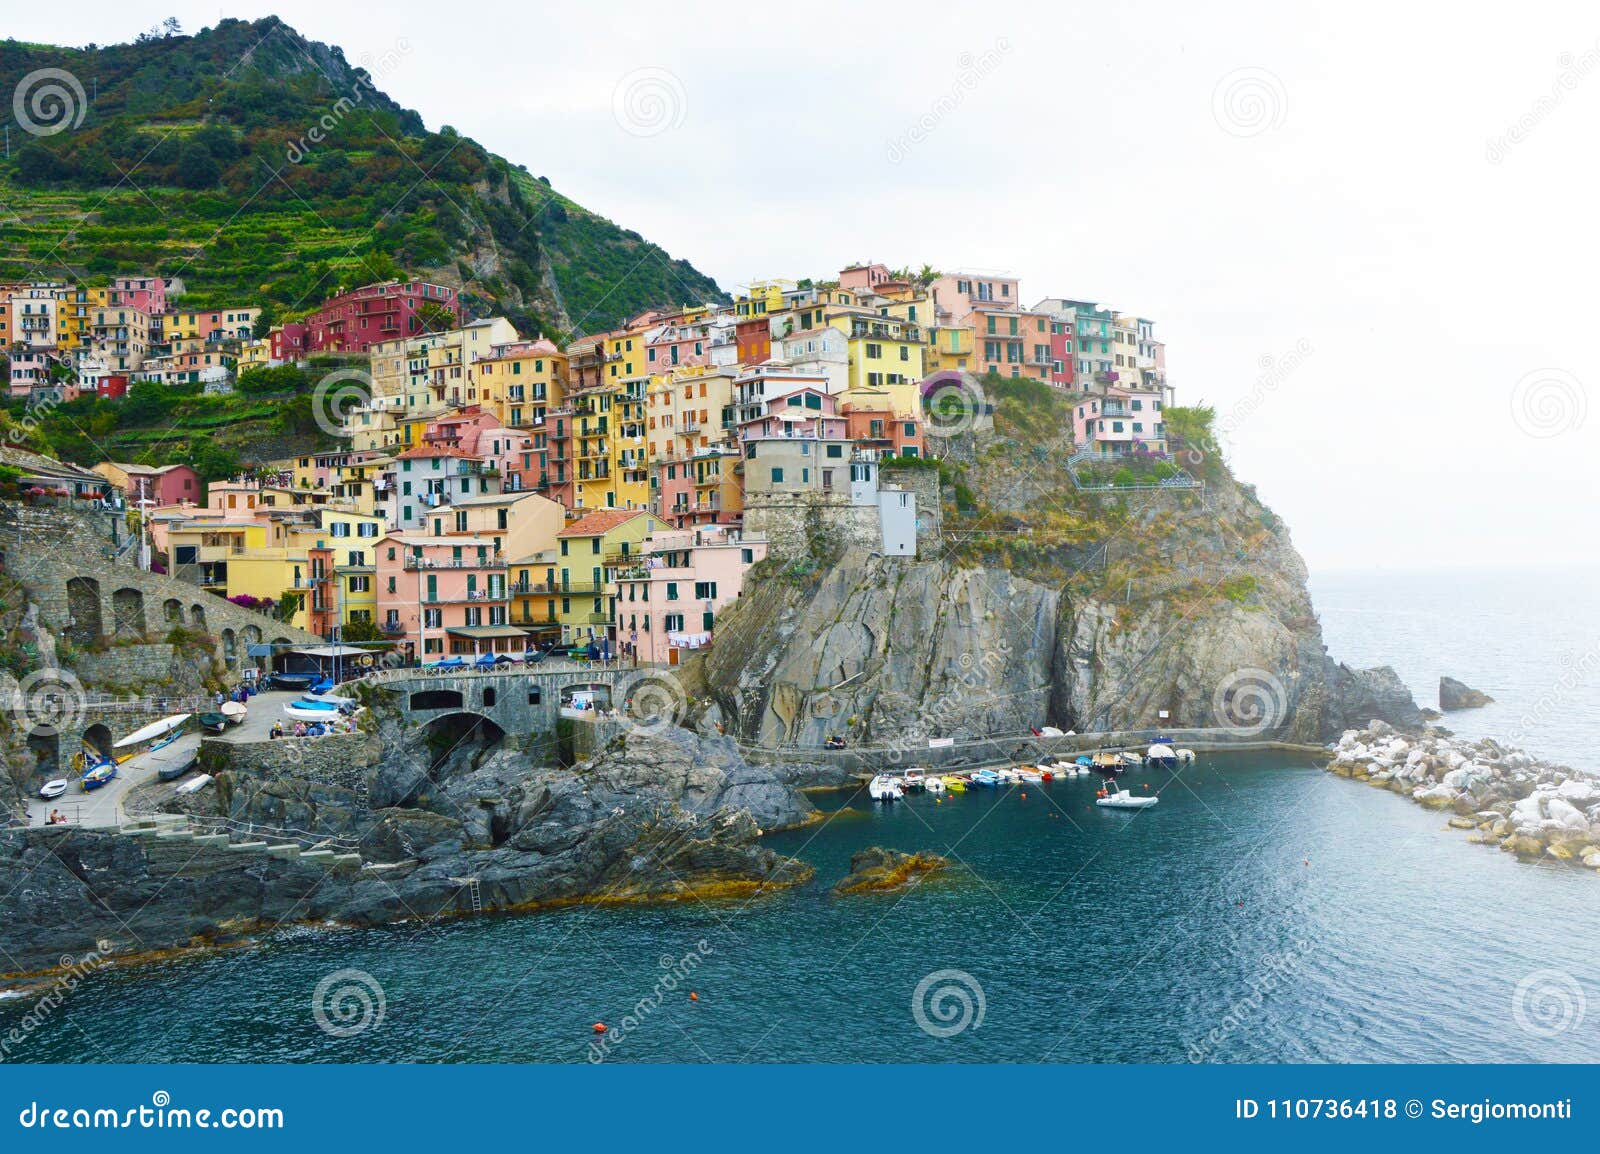 marvelous view of the village of manarola, italy